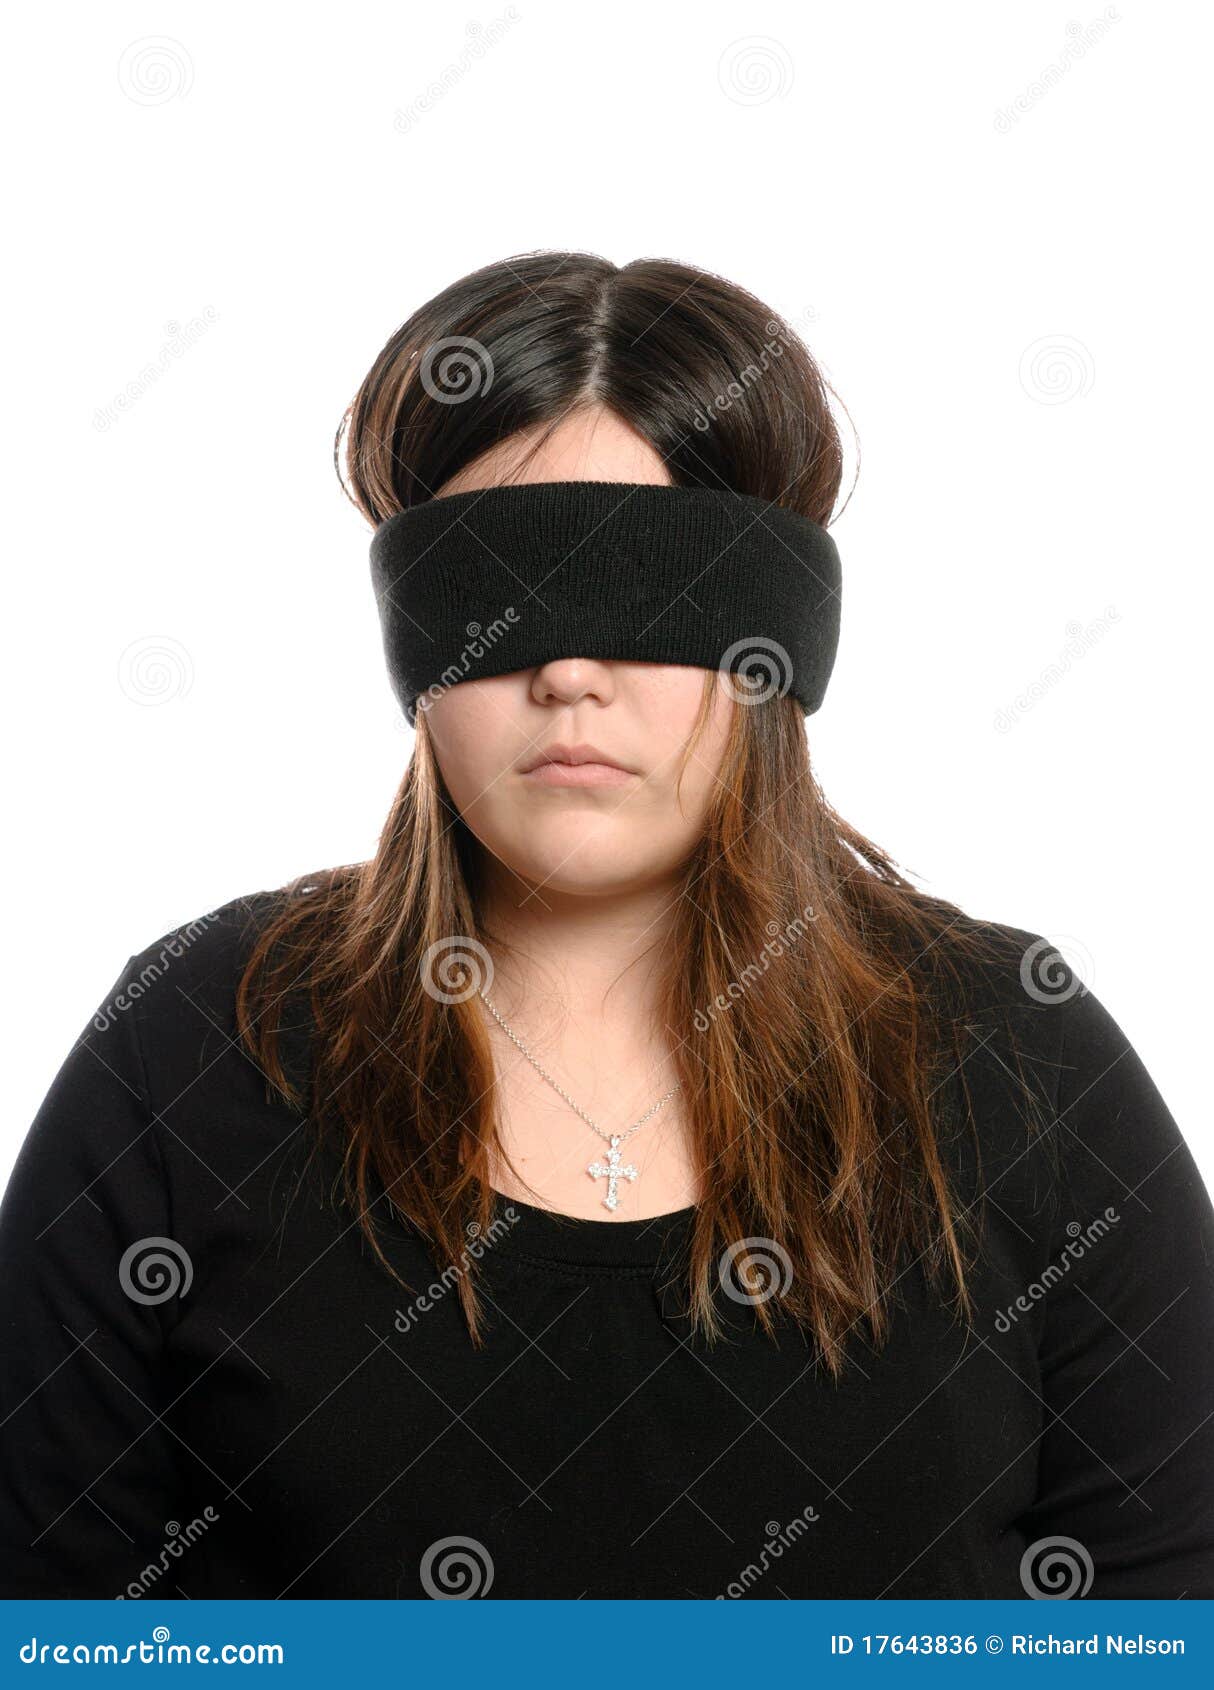 Blindfolded and used